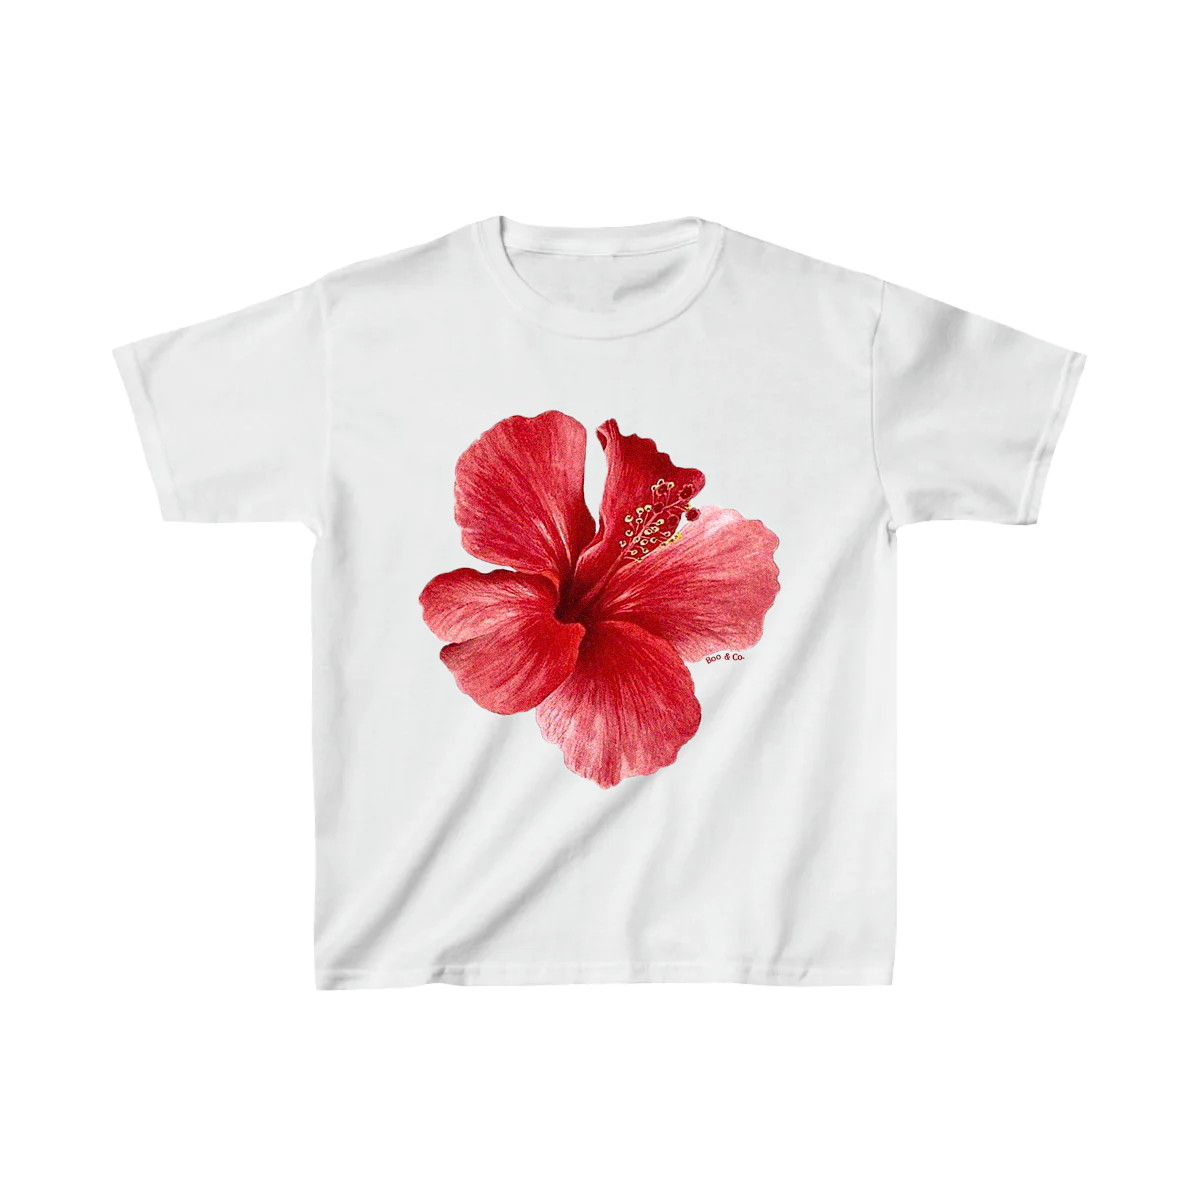 Solo Hibiscus Short-Fit Tee